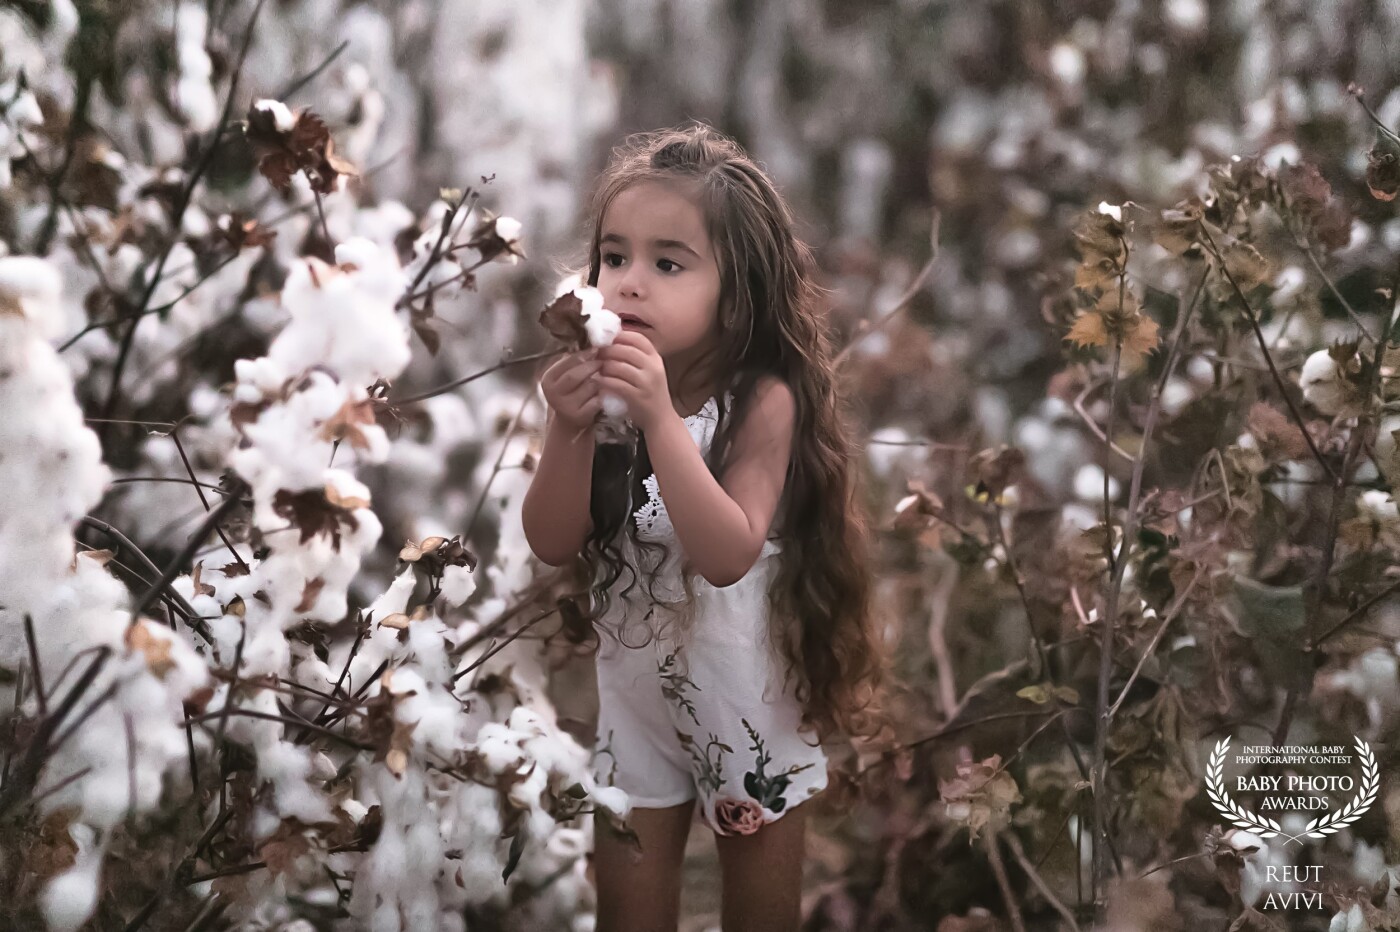 I waited so long for the cotton fields to dry and turn brown in their beautiful color, my beautiful daughter enjoys the softness of the white cotton